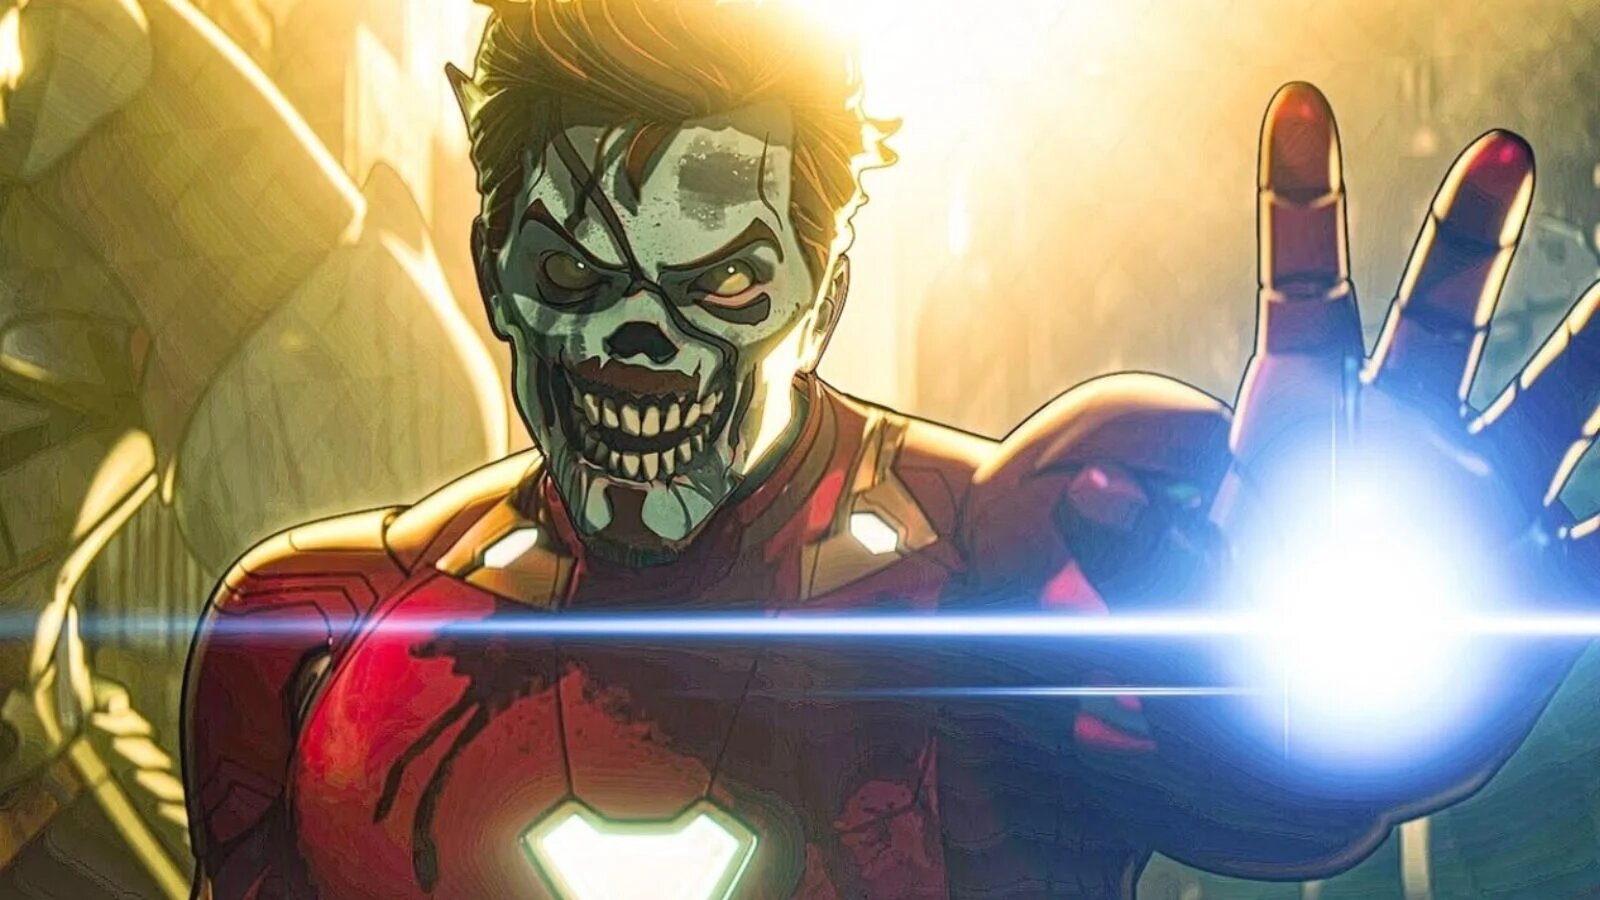 Marvel Zombies Rise Again in a New What If? Poster